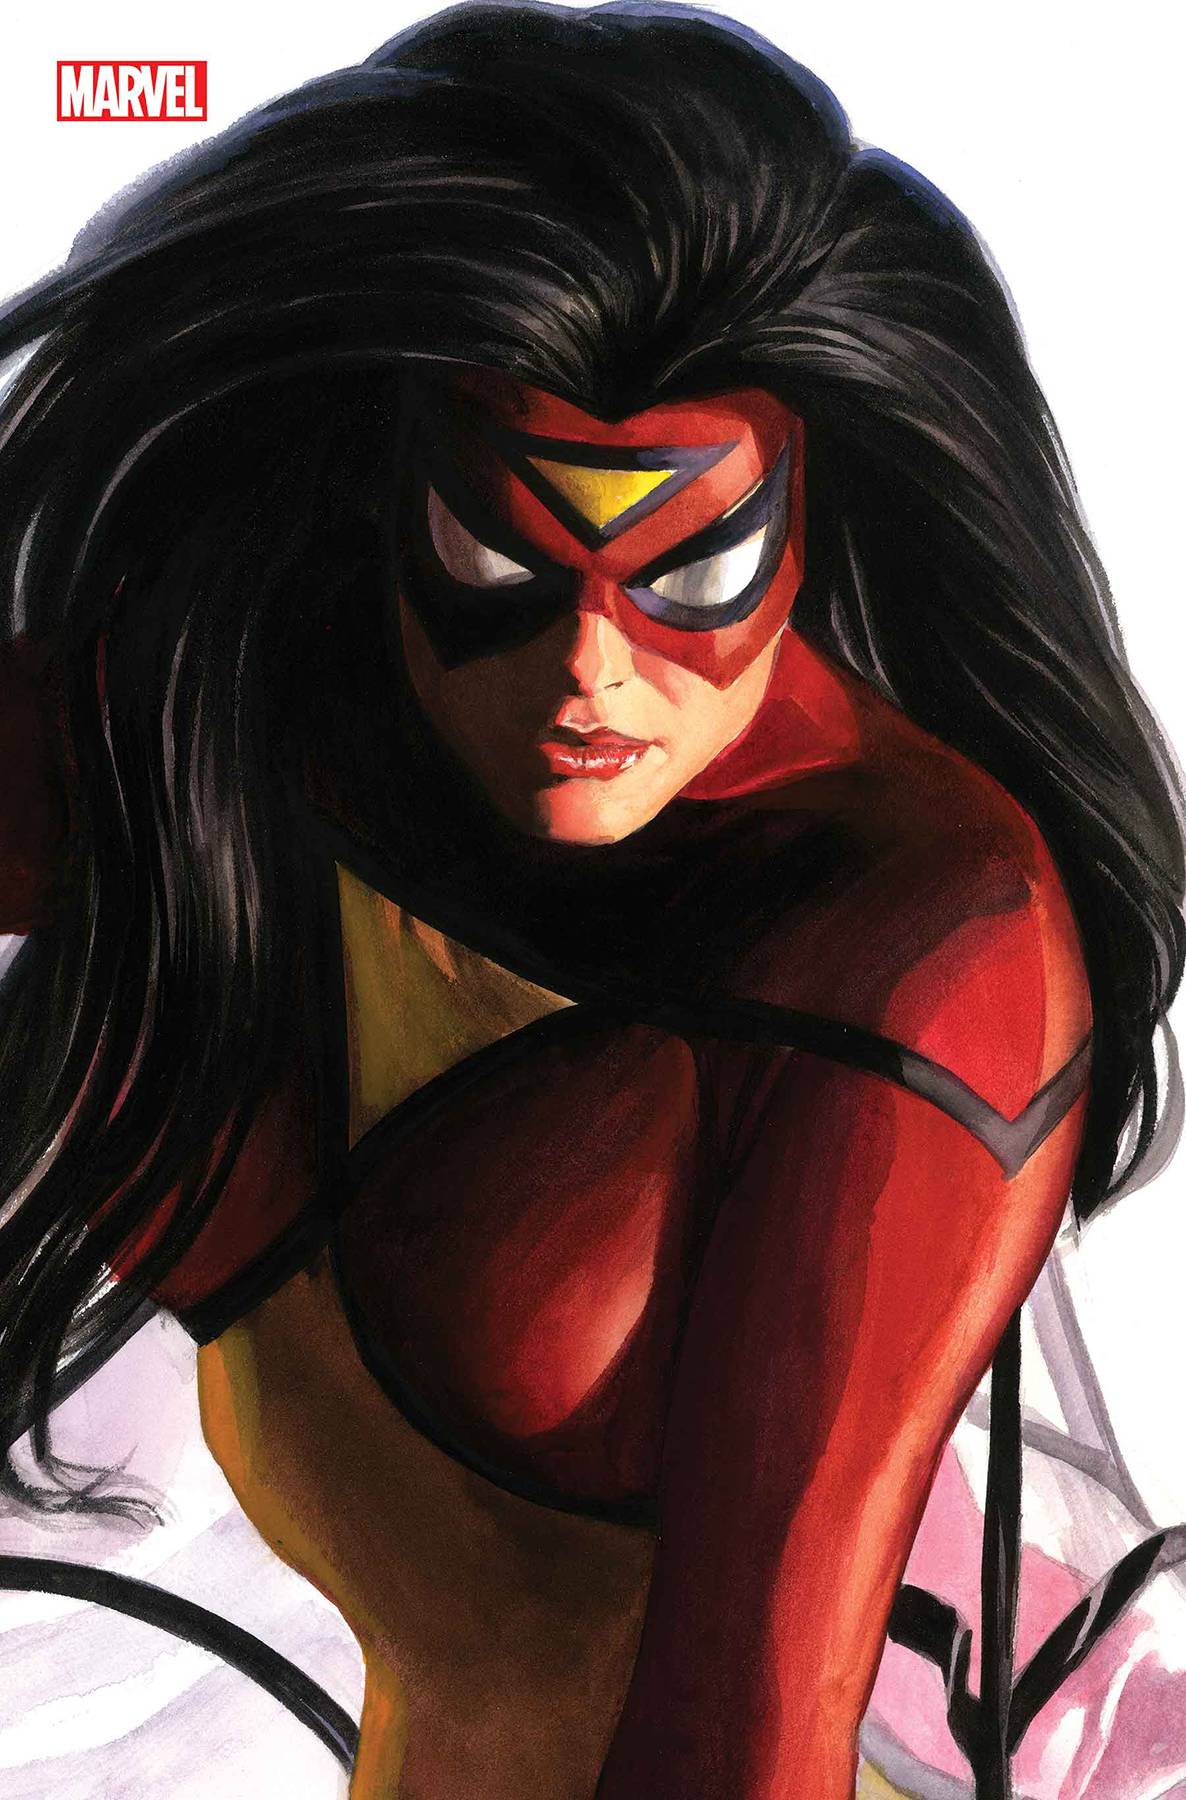 SPIDER-WOMAN #5 ALEX ROSS SPIDER-WOMAN TIMELESS VARIANT VF/NM 2020 MARVEL HOHC 